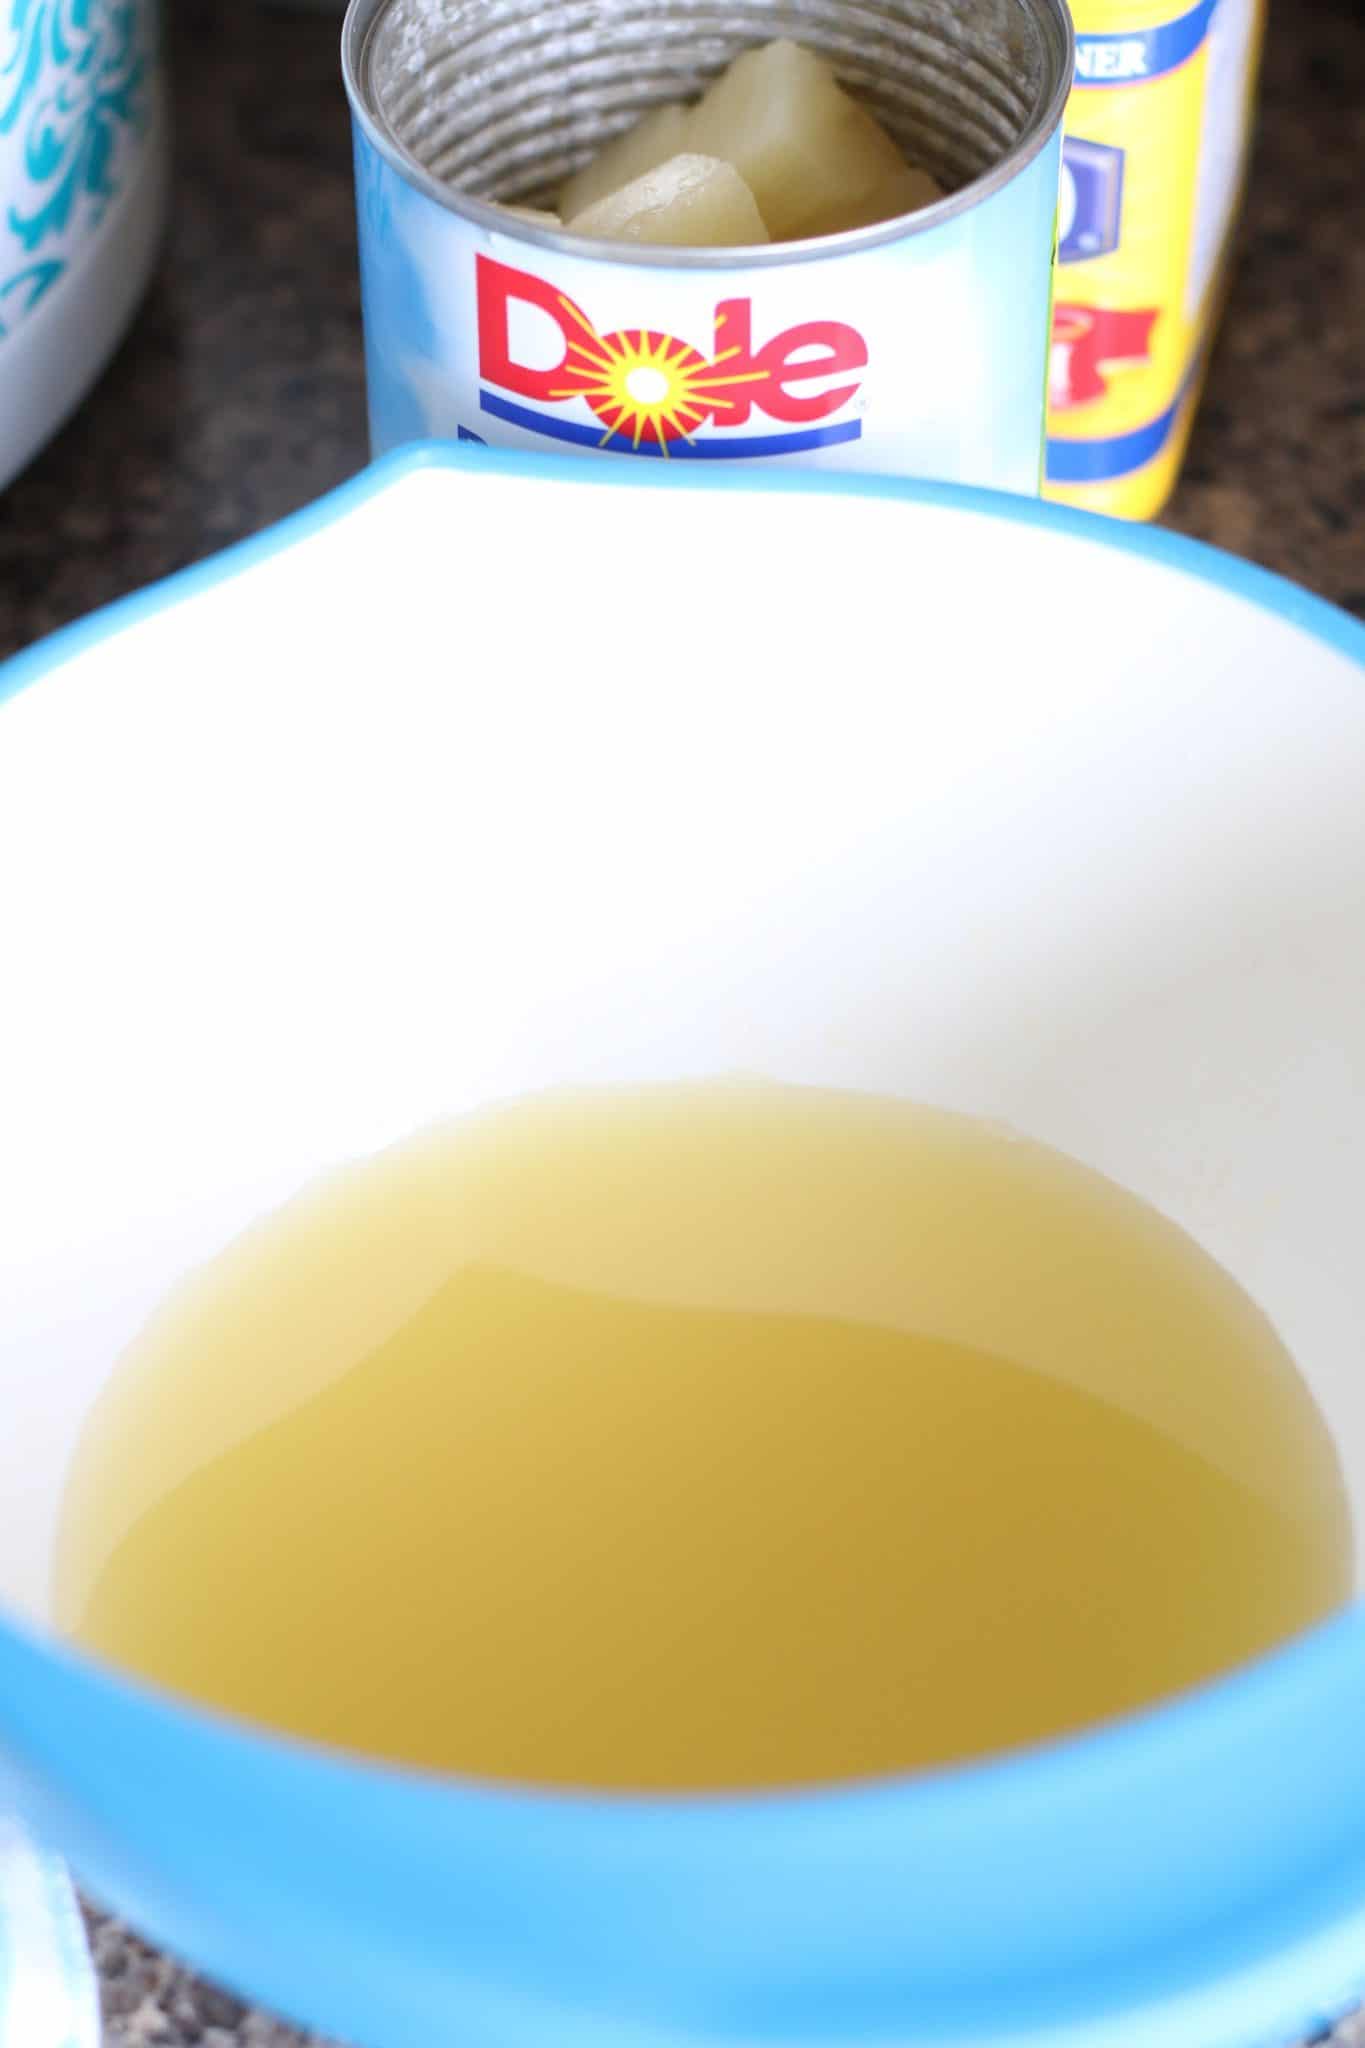 pineapple juice shown in a bowl.